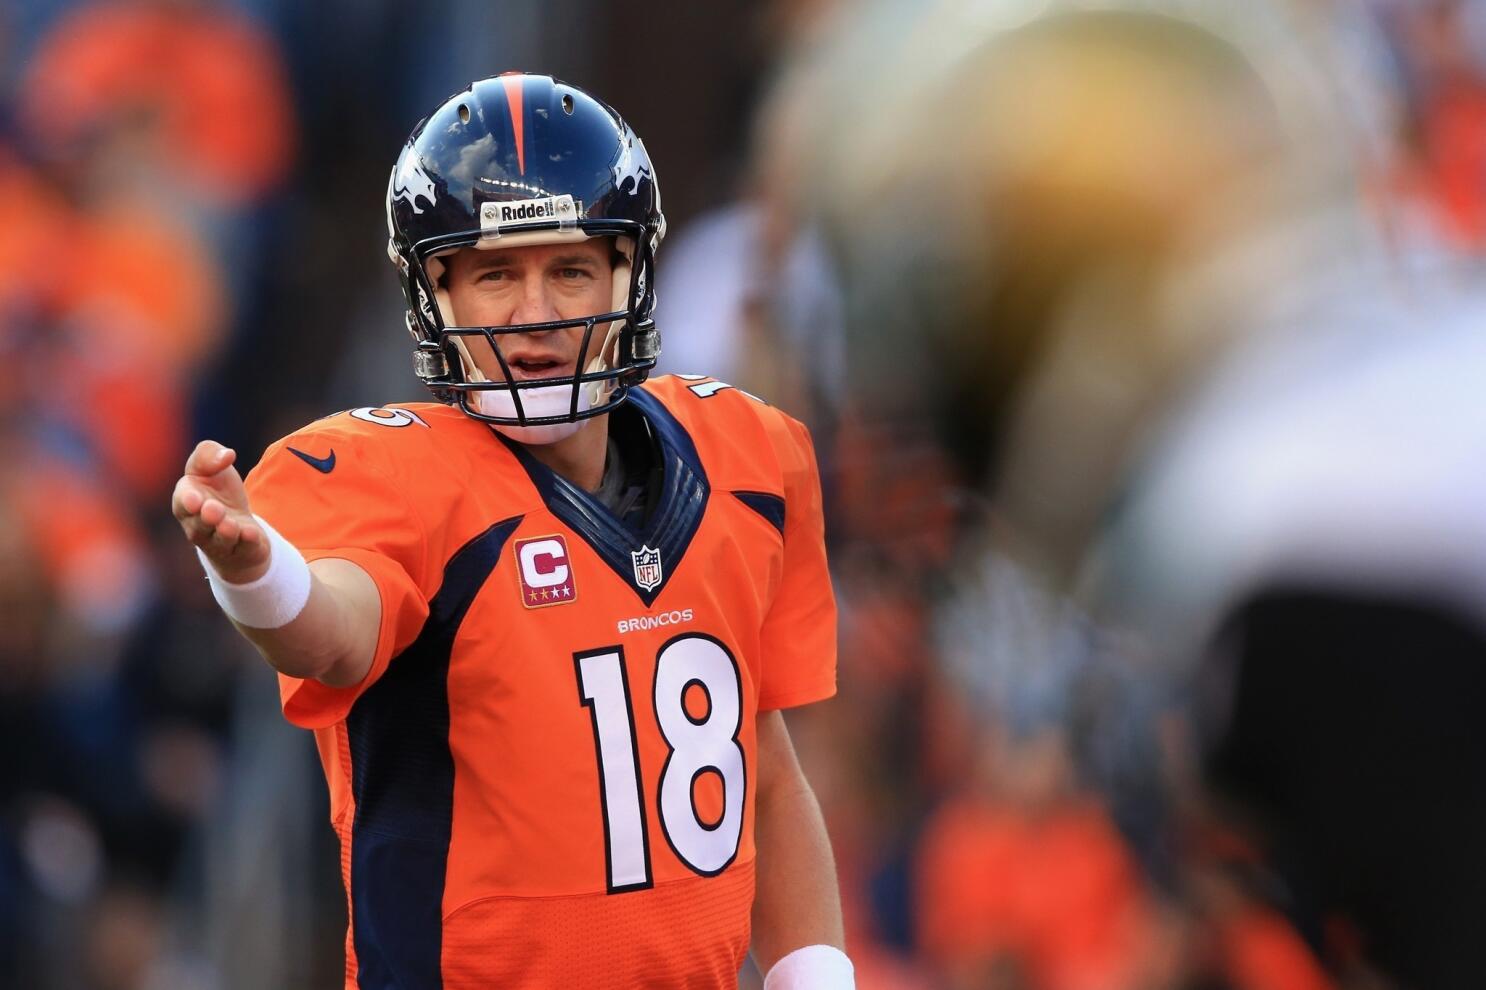 Indianapolis and Peyton Manning view his return with mixed